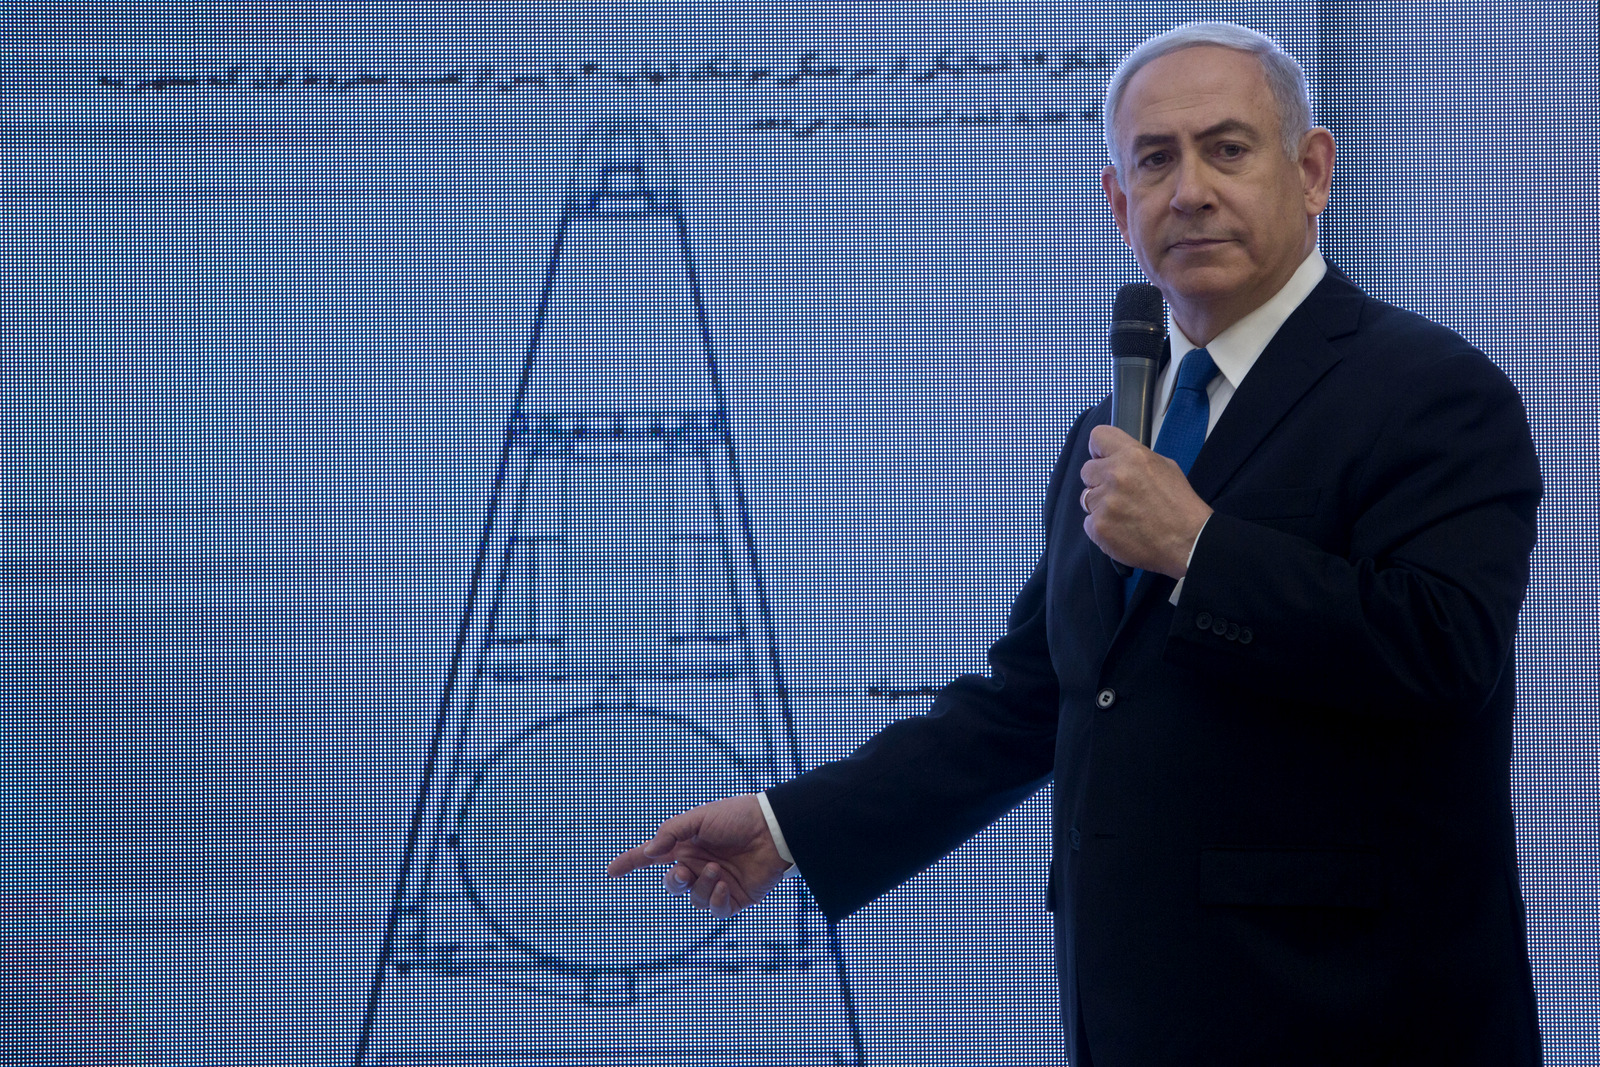 Israeli Prime Minister Benjamin Netanyahu presents material he claims proves Iranian nuclear weapons development during a press conference in Tel Aviv, April 30 2018. (AP/Sebastian Scheiner)